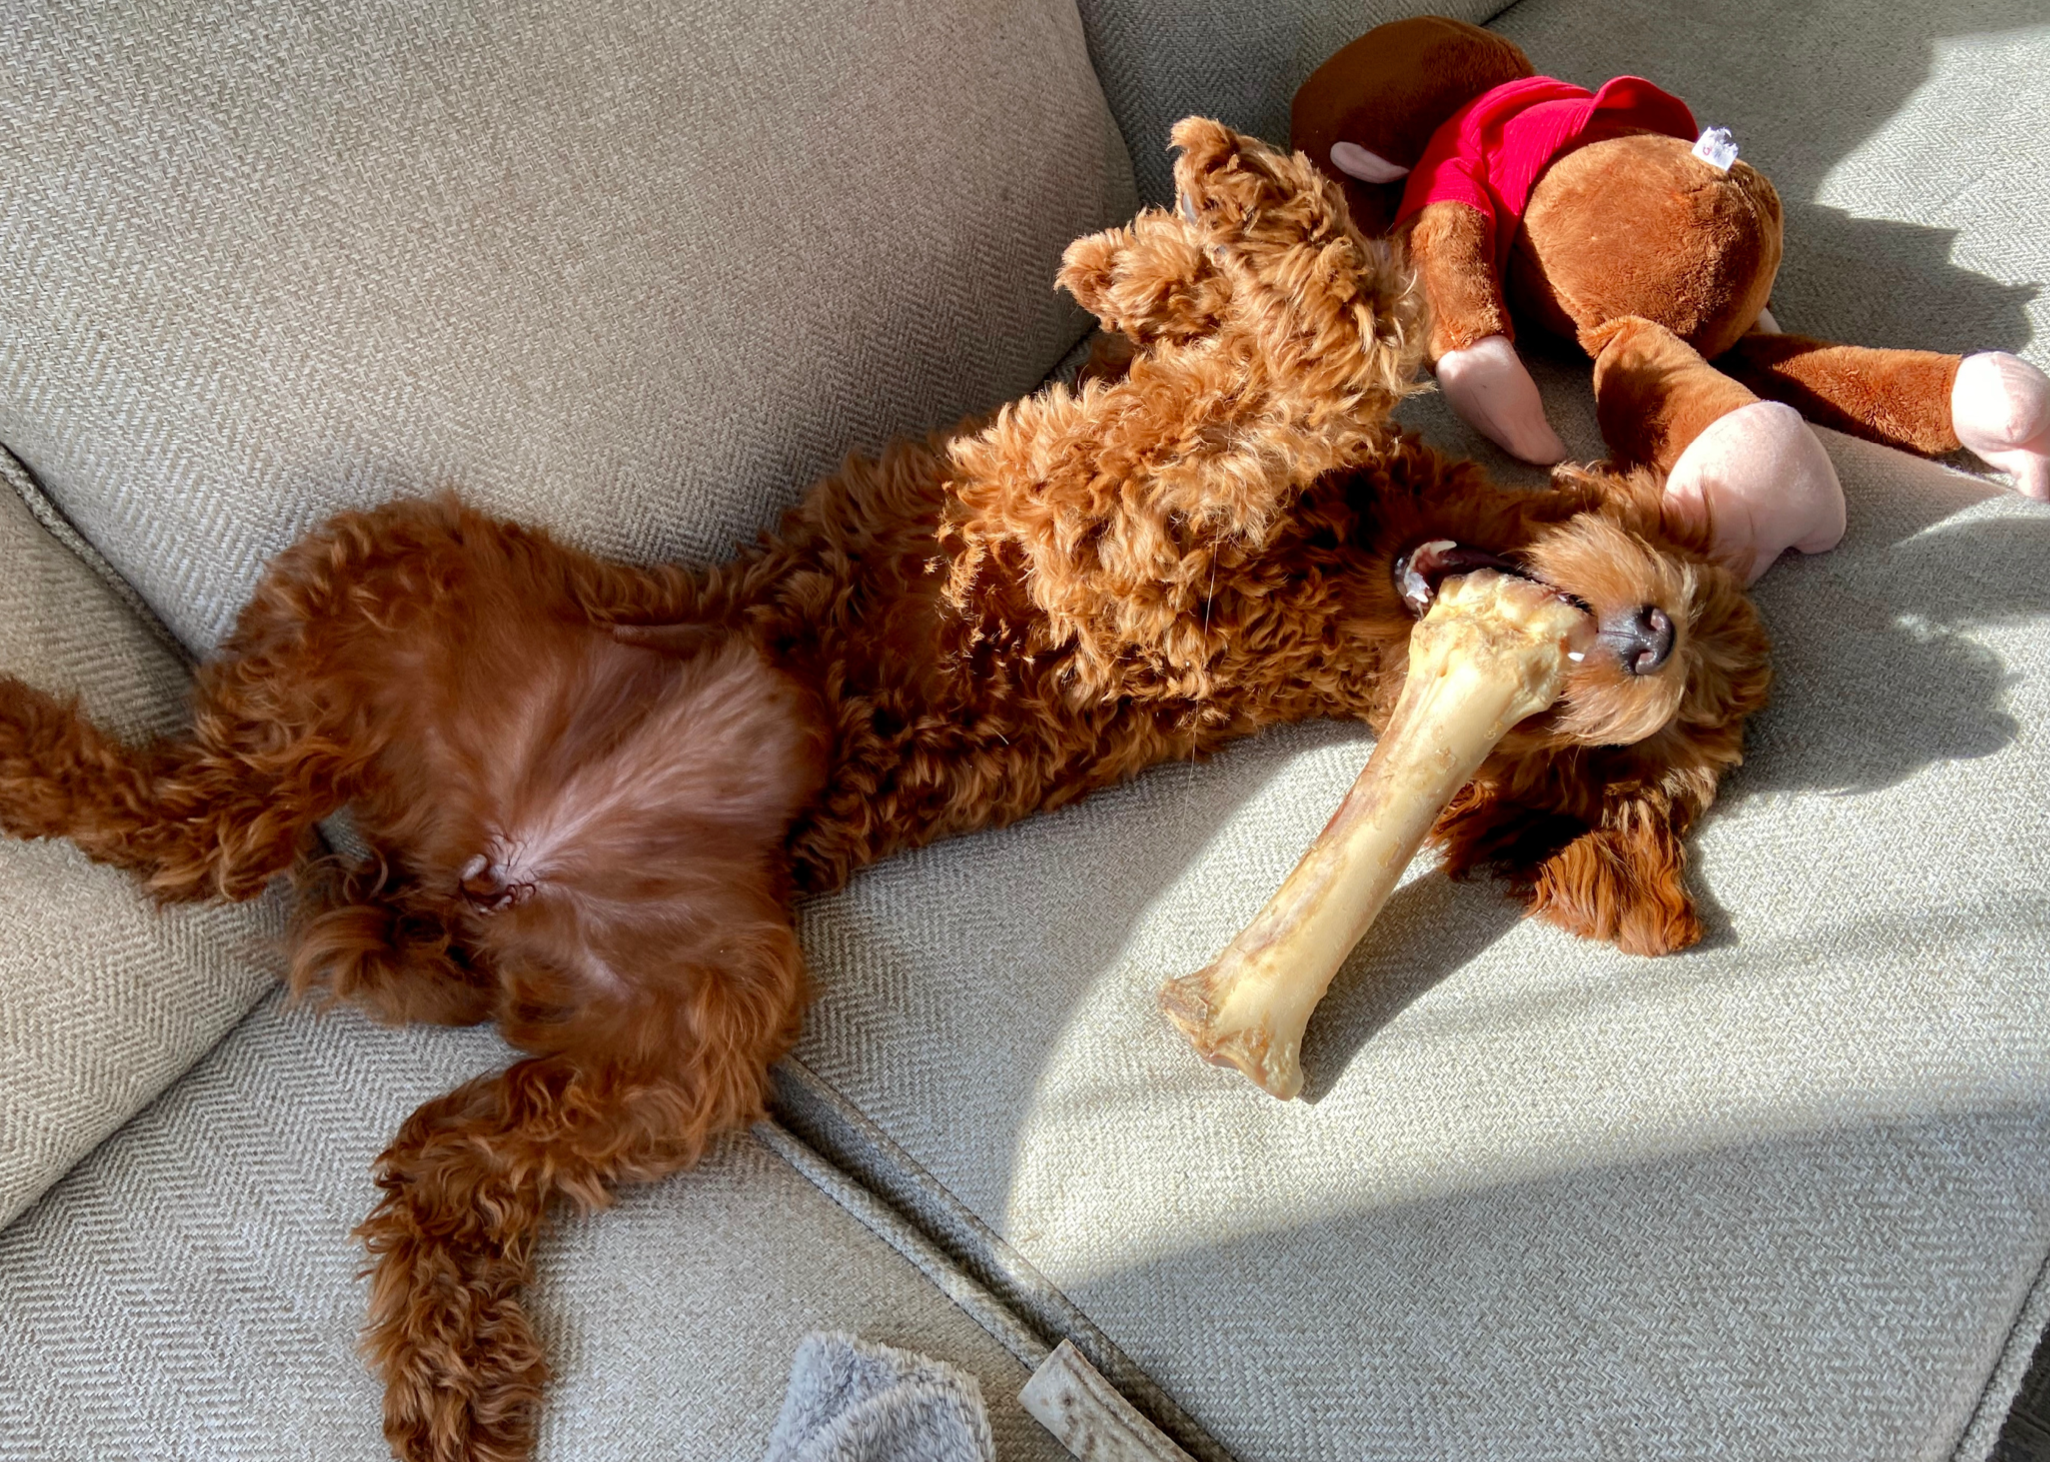 10 wonderful Mini Goldendoodle Toys your puppies will Love!